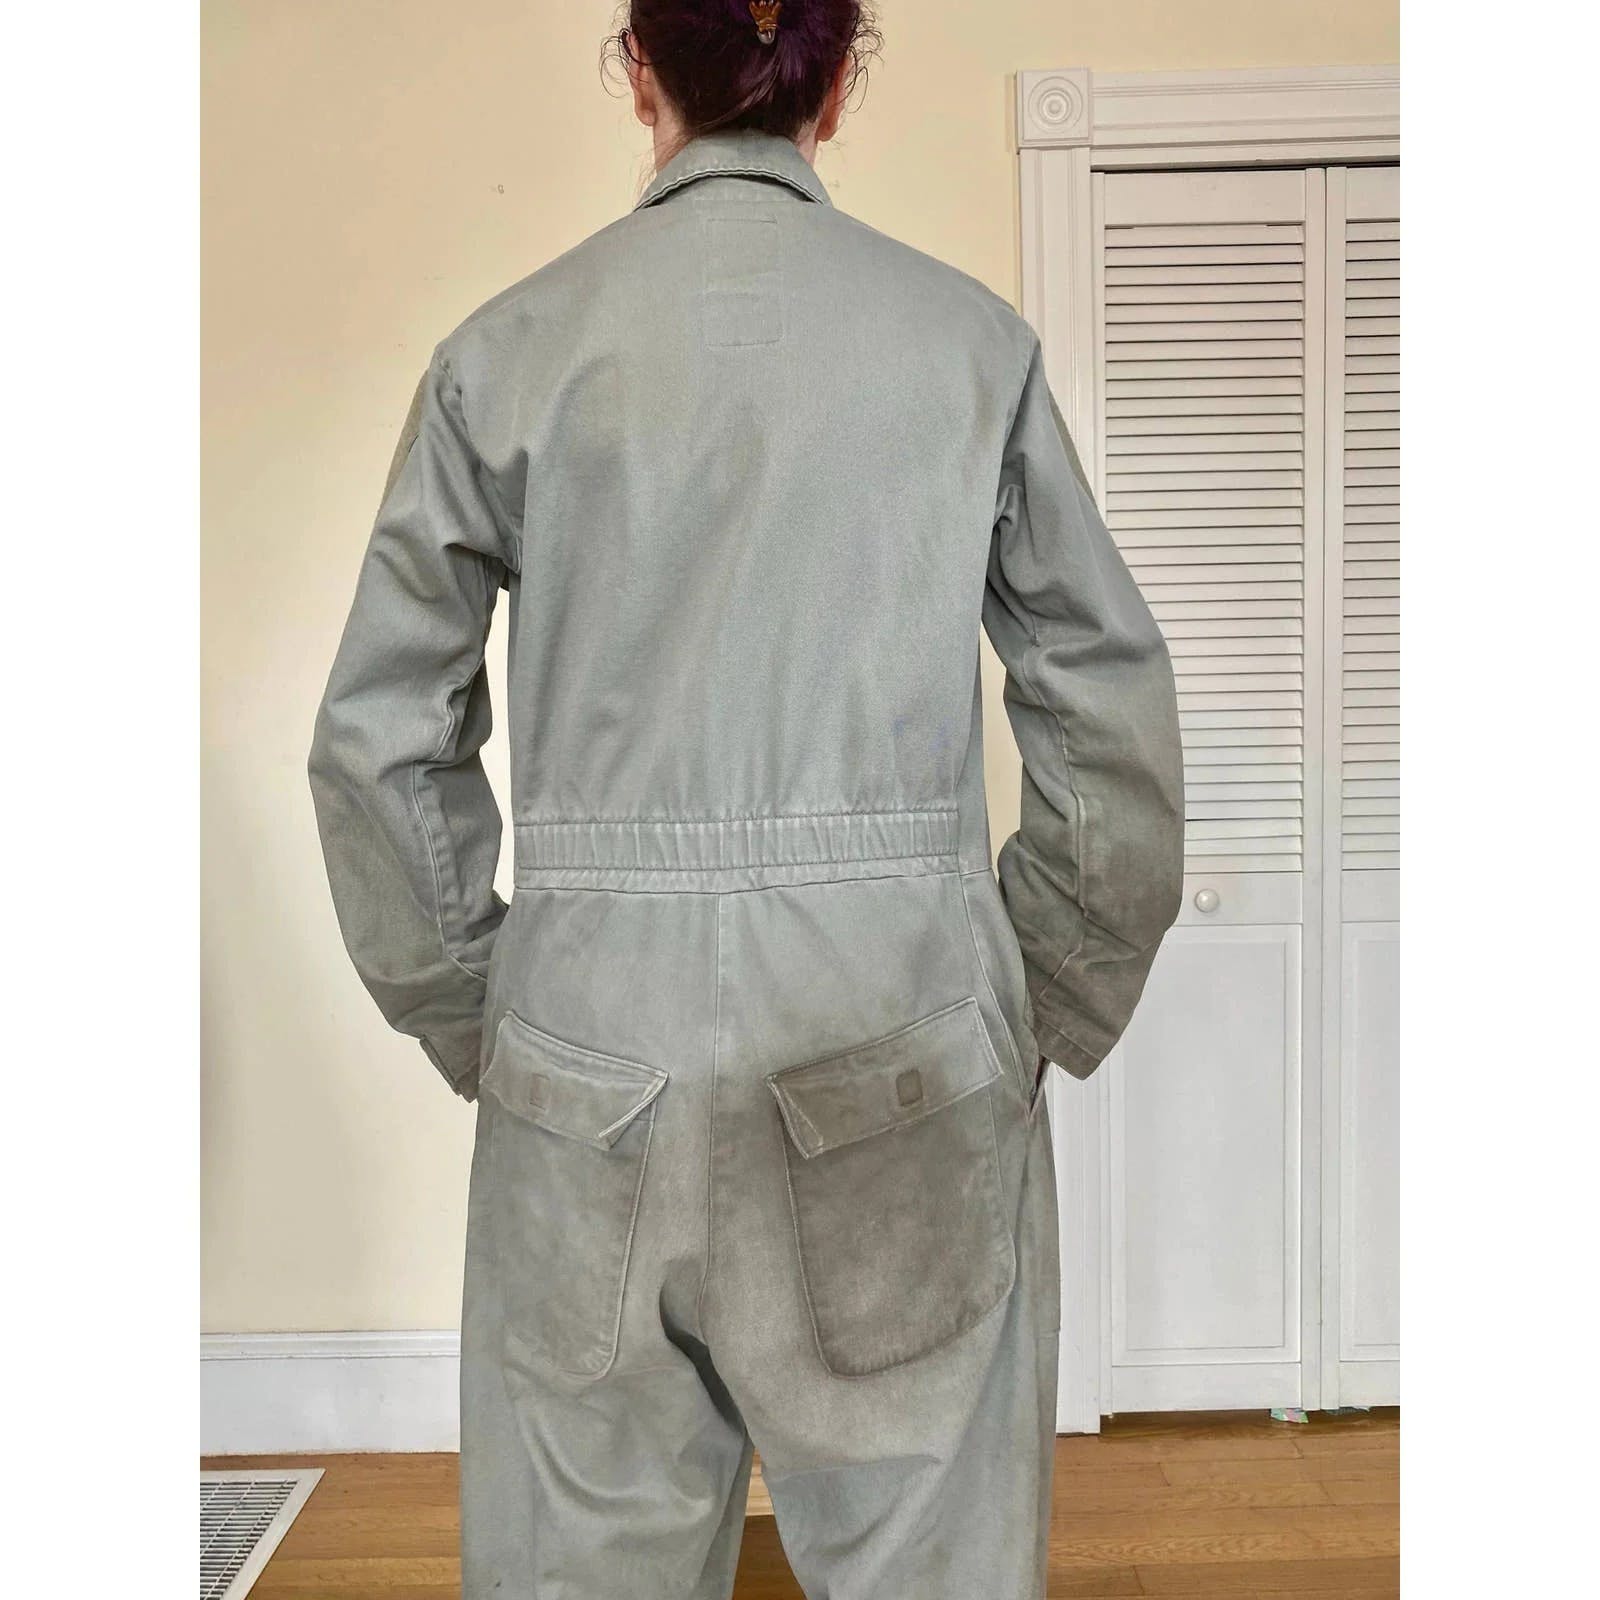 Vintage 80’s Gray Oil Stained Mechanic Coveralls Overalls Military ...